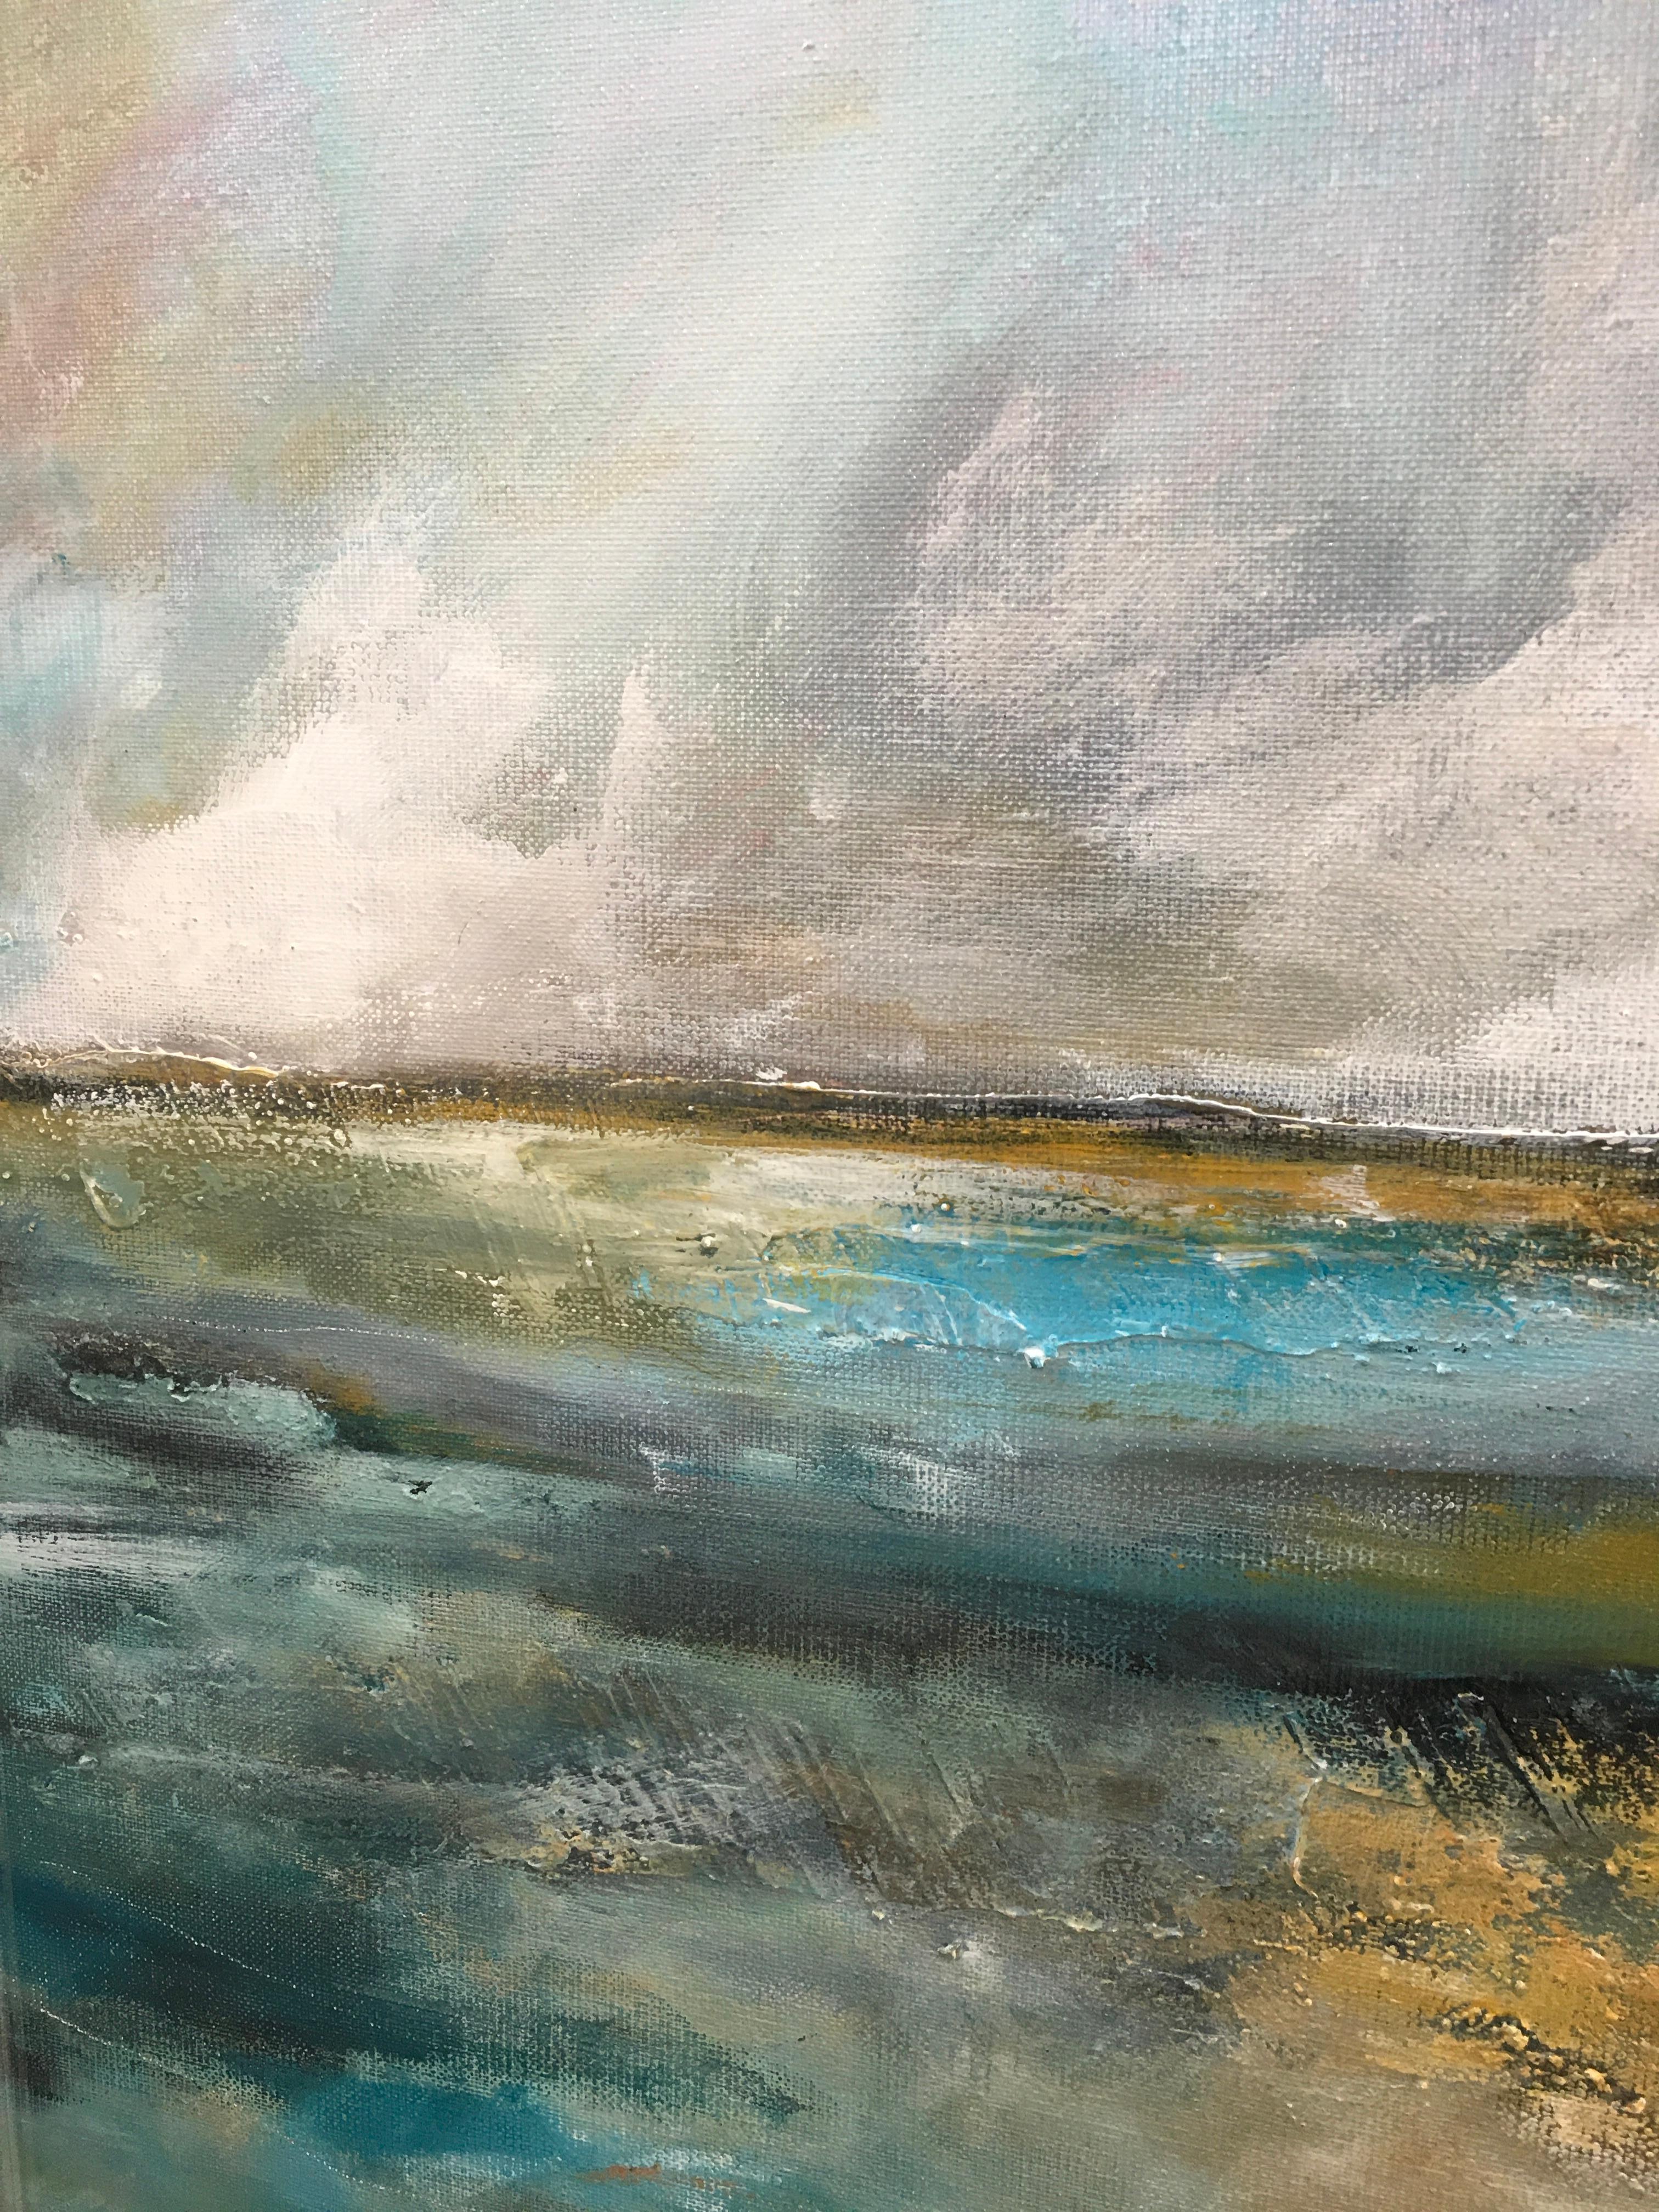 Machrihanish Beach Campbeltown - Contemporary Seascape Painting by Mark McCallum For Sale 2